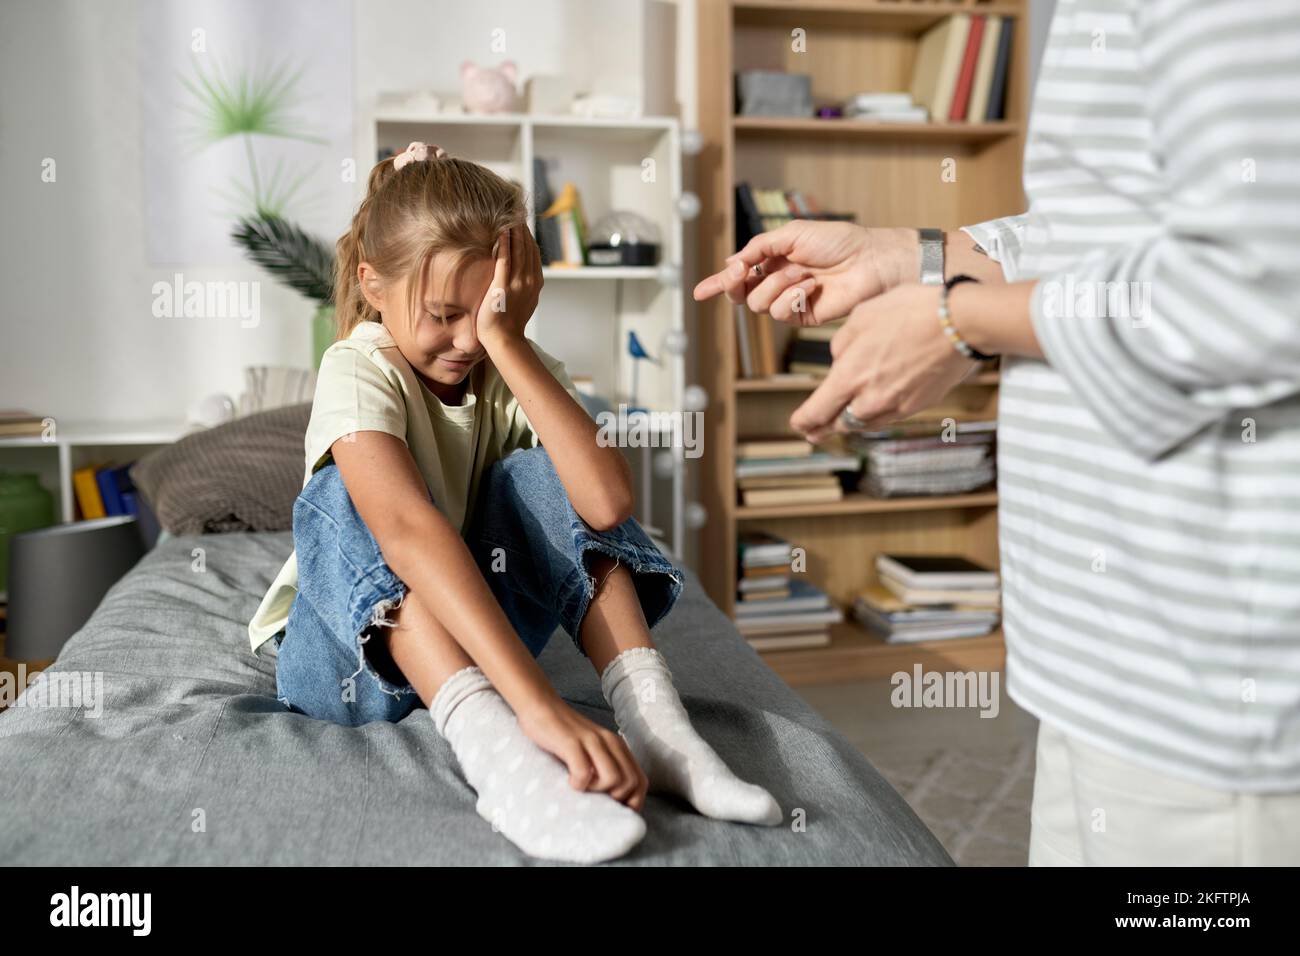 Little girl sitting on her bed and crying while her mom scolding her for bad behavior Stock Photo